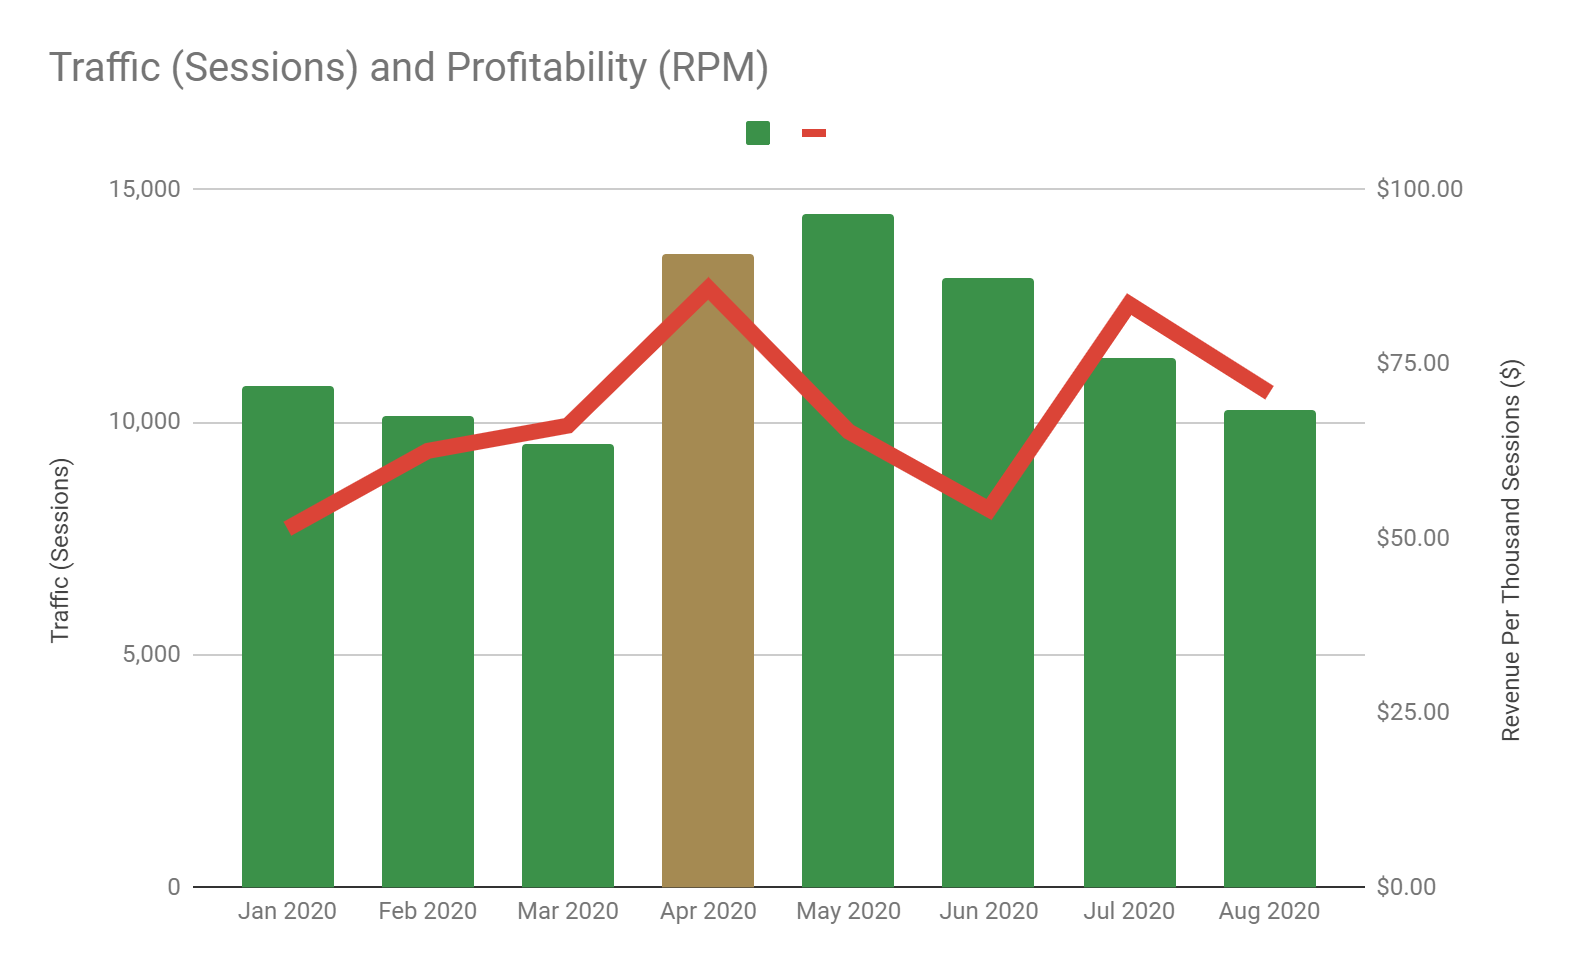 Total Sessions and Profitability - Jan 2020 to Aug 2020